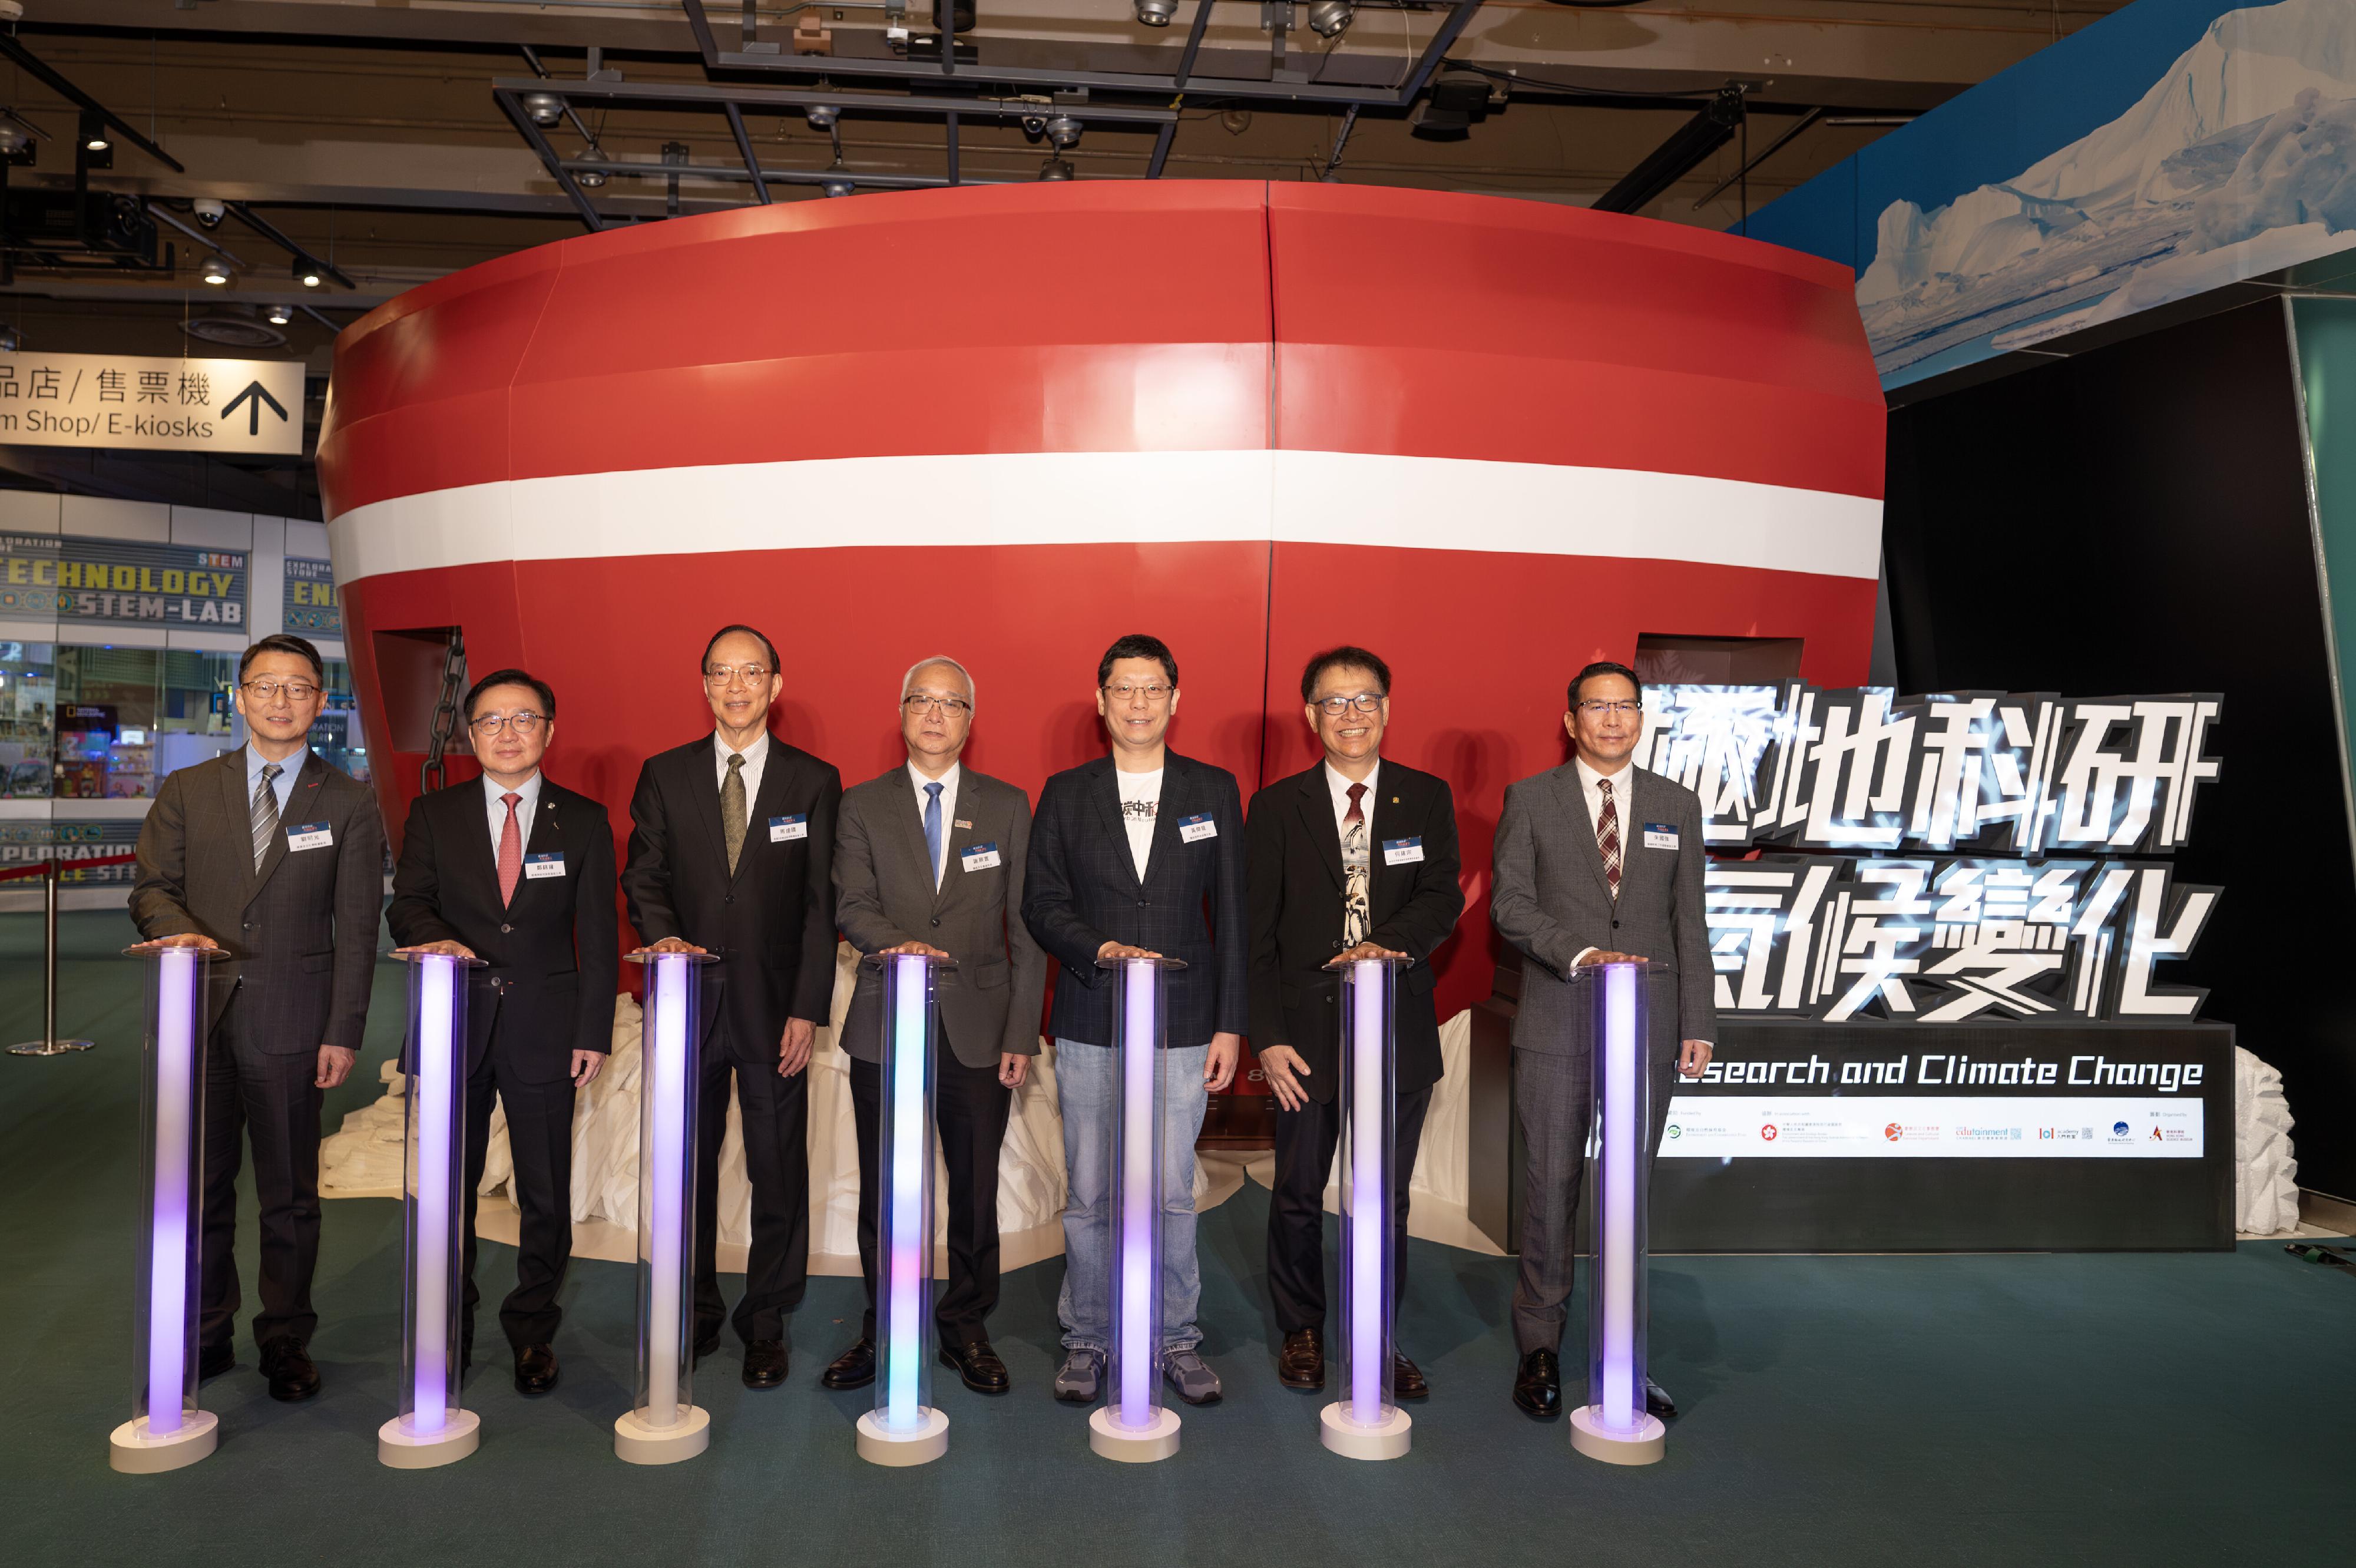 The "Polar Research and Climate Change" exhibition opened at the Hong Kong Science Museum today (March 18). Photo shows the Secretary for Environment and Ecology, Mr Tse Chin-wan (fourth left); the Chairman of the Environmental Campaign Committee, Professor Simon Wong (third right); the Chairman of the Environment and Conservation Fund Committee, Dr Eric Cheng (second left); the Chairman of the Xuelong 2 Hong Kong Visit Preparatory Committee, Mr Ma Fung-kwok (third left); the Founding Chairman and Director of Green Future Foundation Association, Professor Ho Kin-chung (second right); the Director of Leisure and Cultural Services, Mr Vincent Liu (first left); and Vice Chairman of the Hong Kong Federation of Education Workers Mr Chu Kwok-keung (first right) officiating at the launching ceremony.